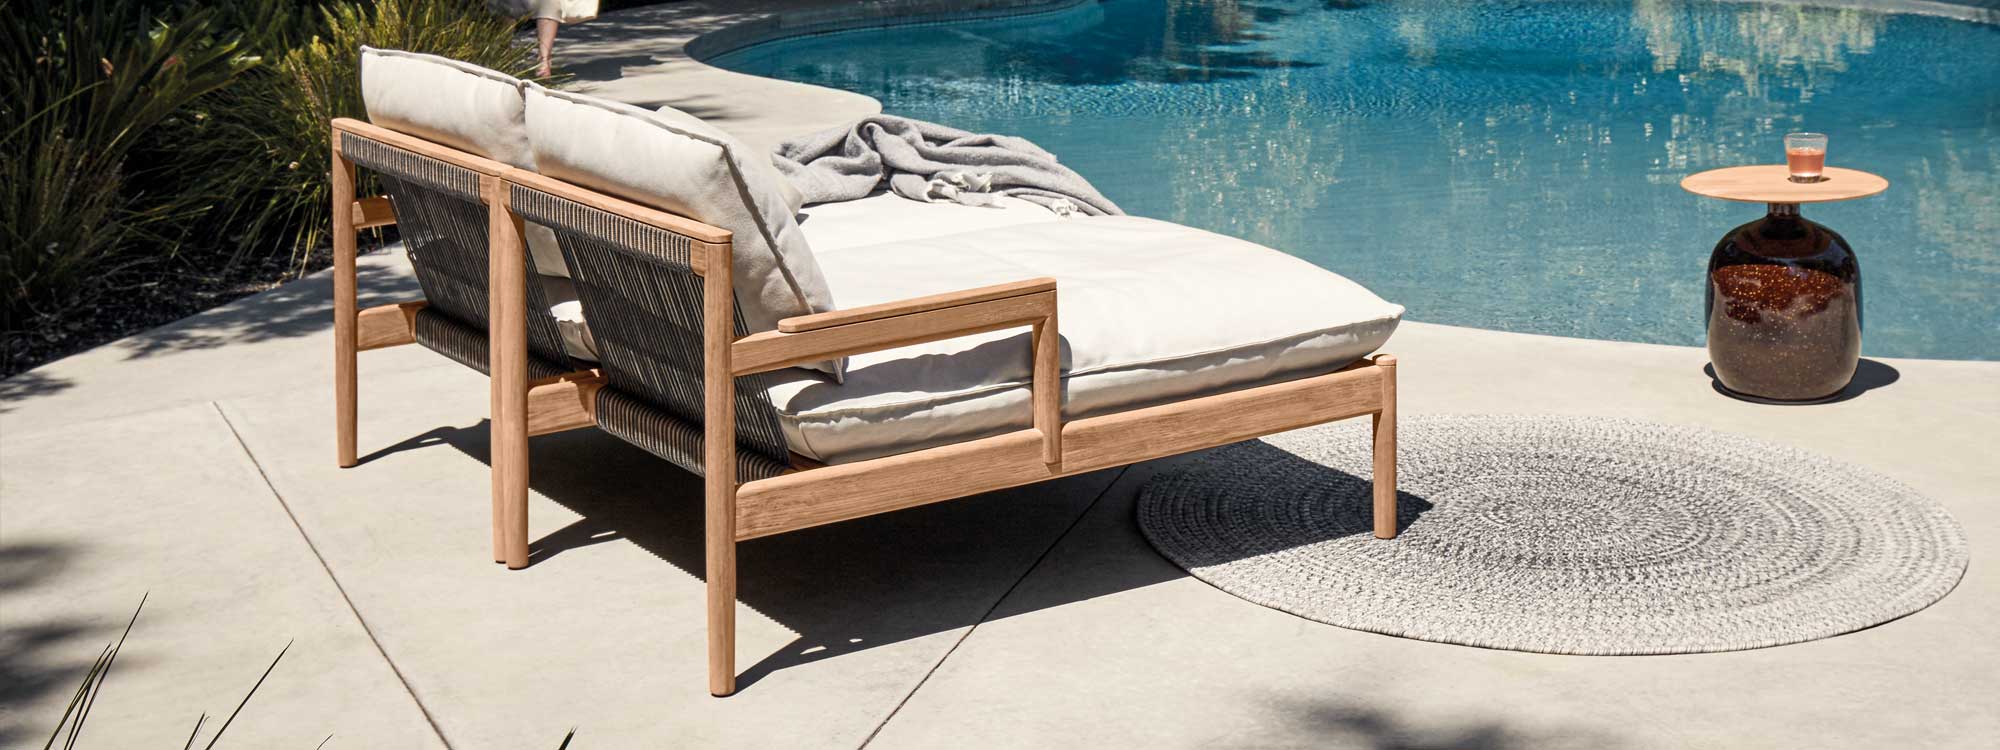 Image of pair of Gloster Saranac teak daybeds with black all-weather rope, placed side to side next to Blow side table